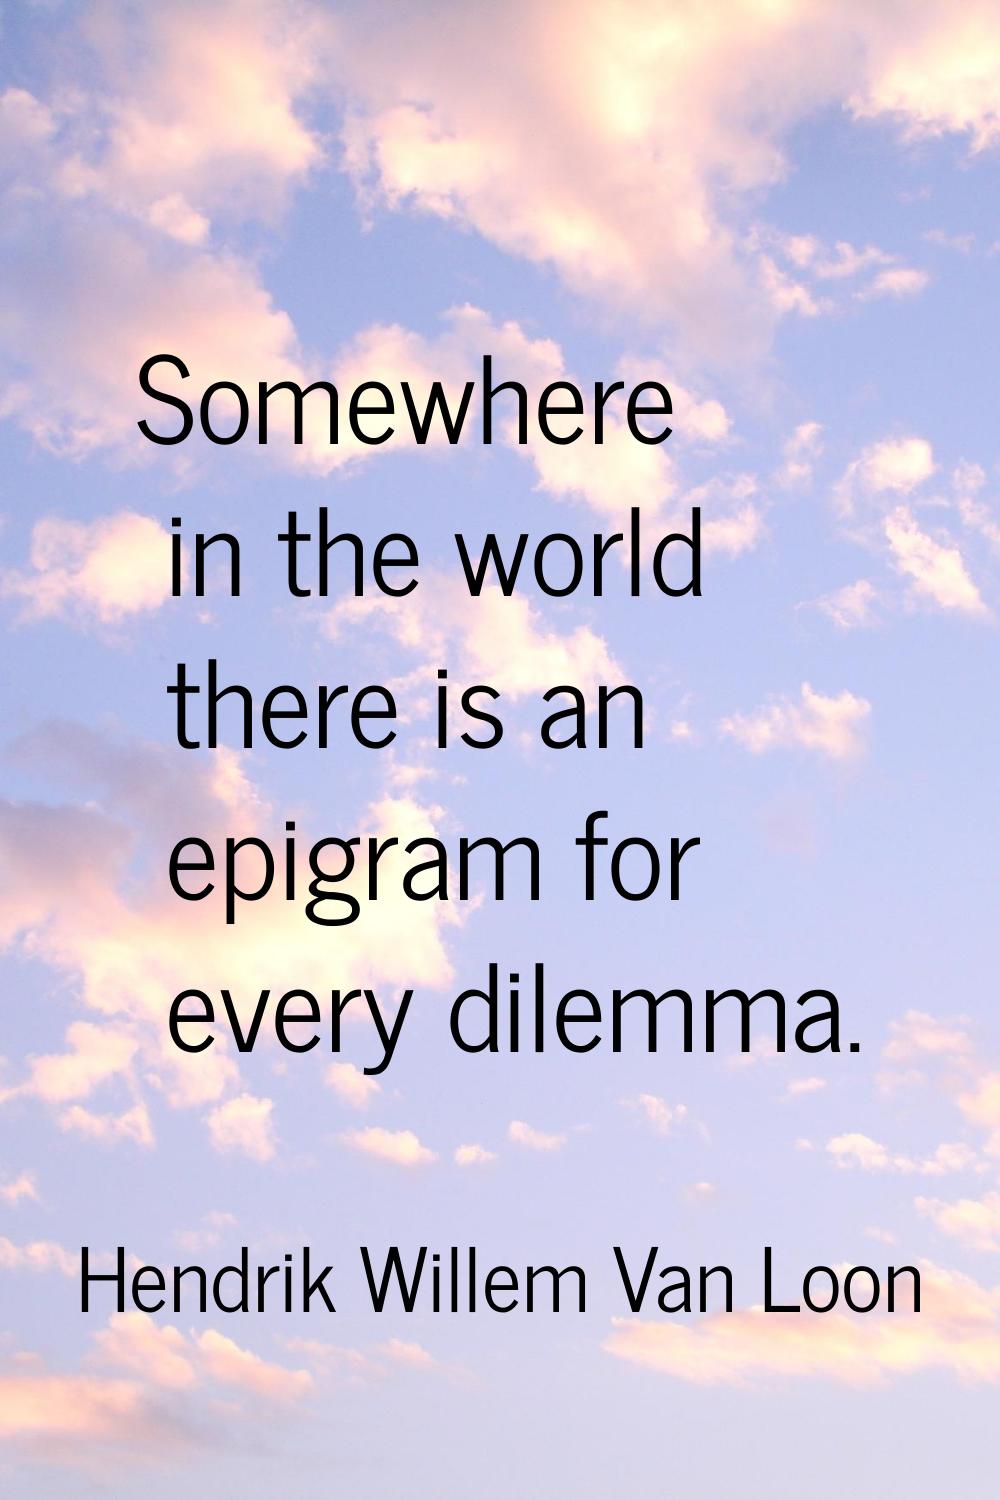 Somewhere in the world there is an epigram for every dilemma.